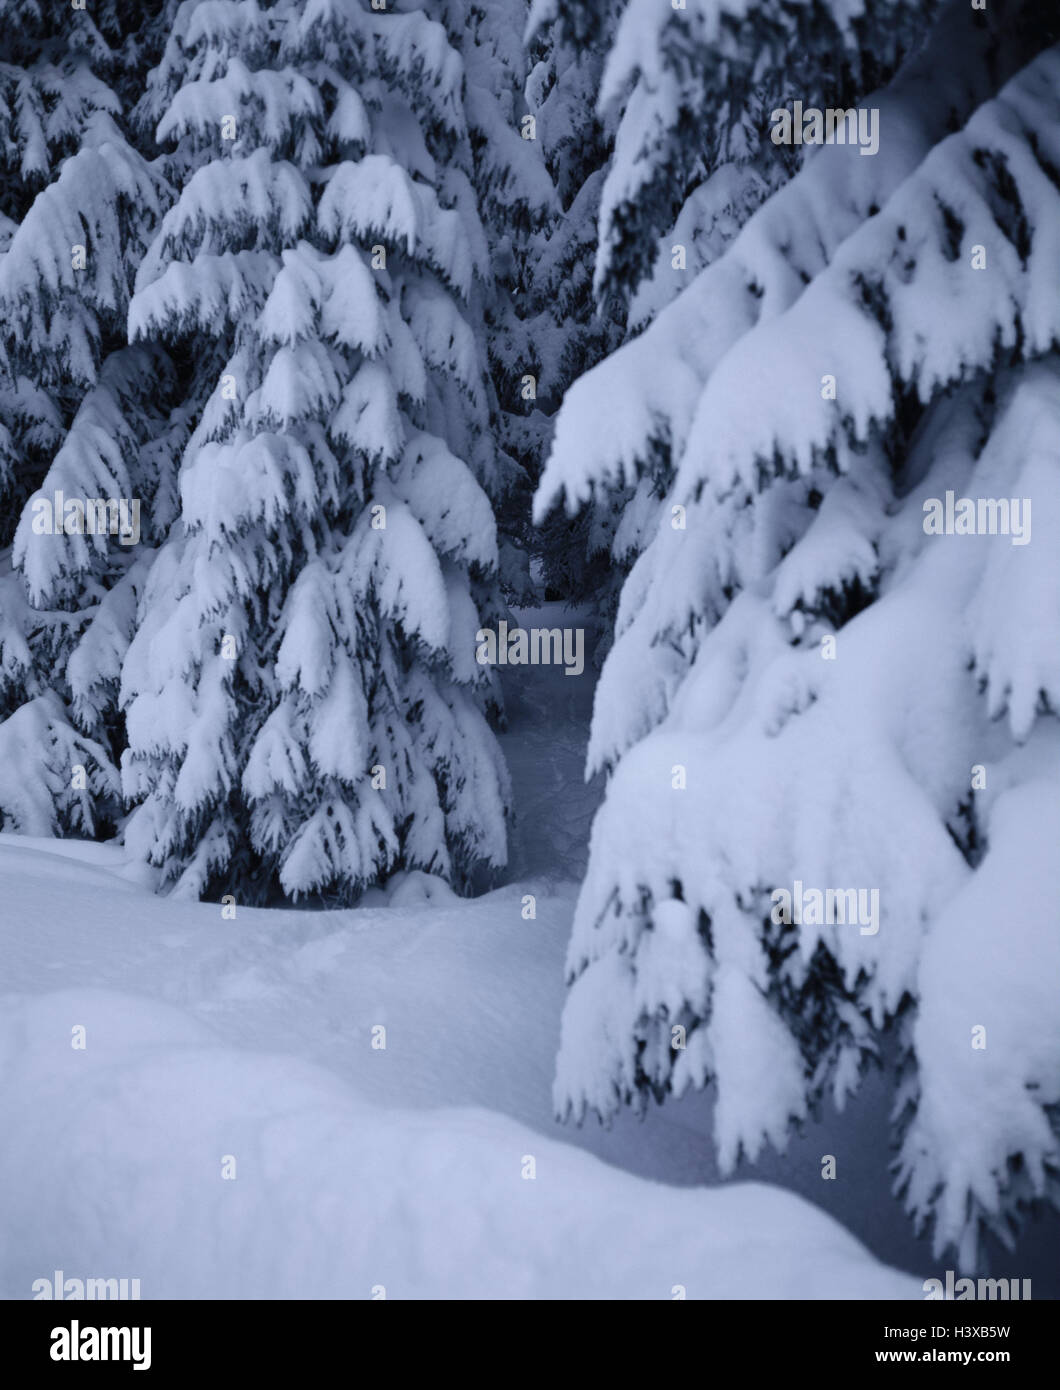 Wood, conifers, near, winter, trees, detail, snow, coniferous forest, winter scenery, Stock Photo